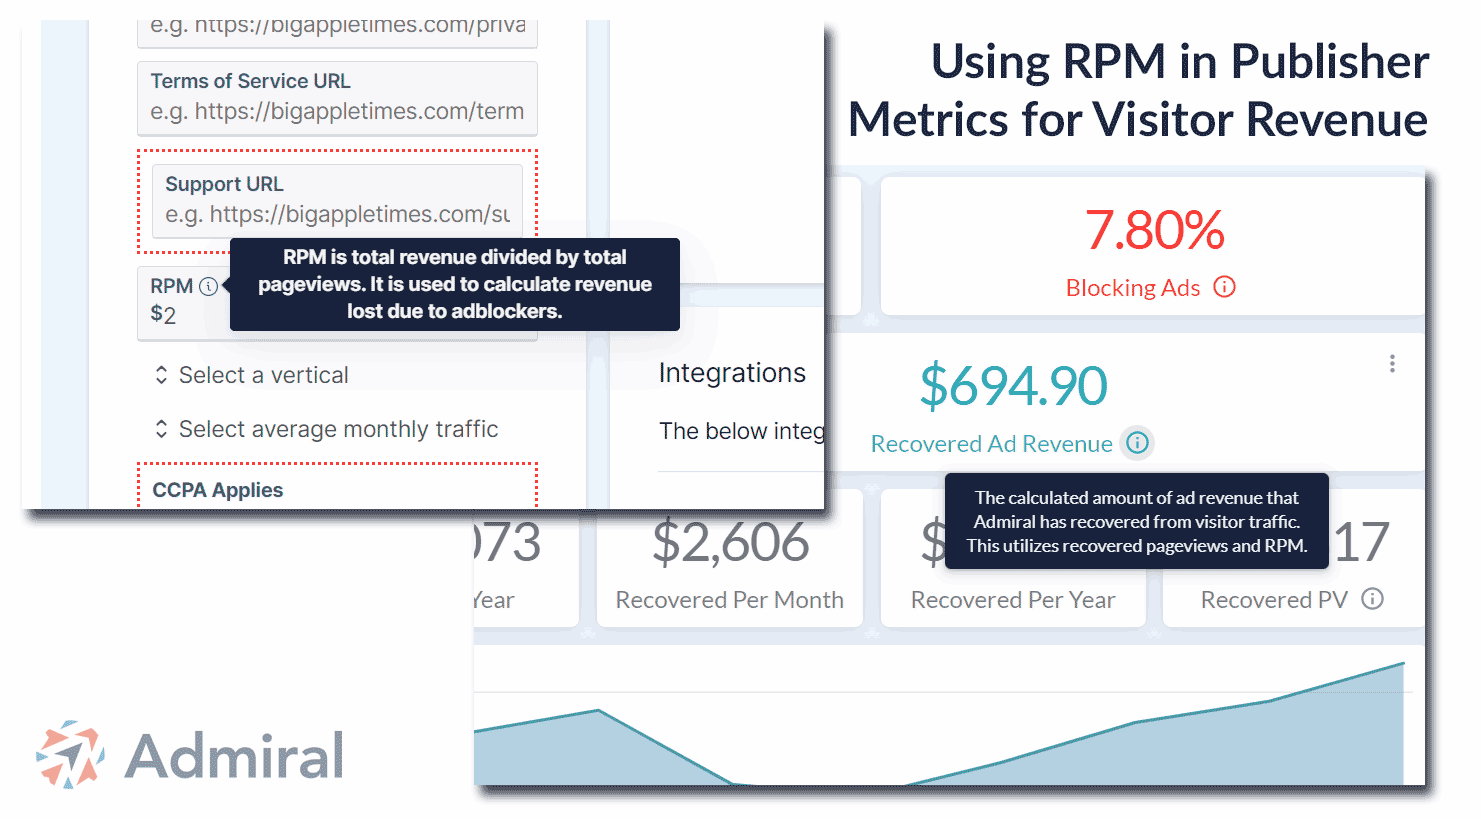 RPM vs CPM - Whats the difference and how to increase them in 2023